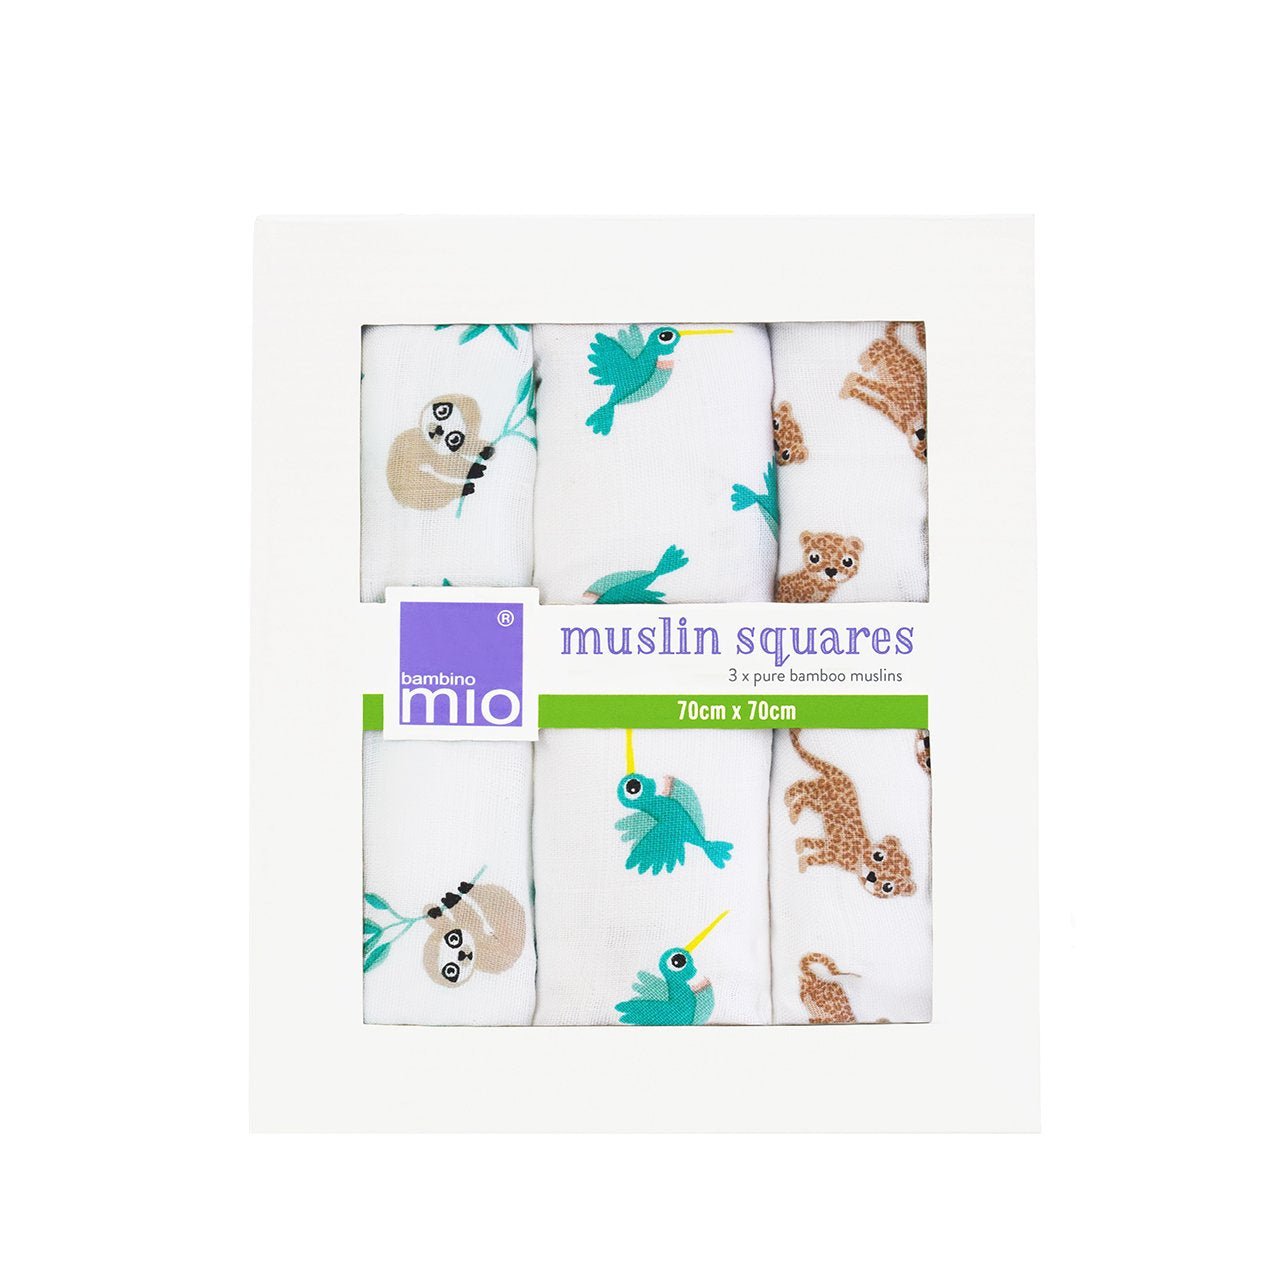 Bambino Mio| New Arrival Gift Set - Newborn Essentials | Earthlets.com |  | changing change mats